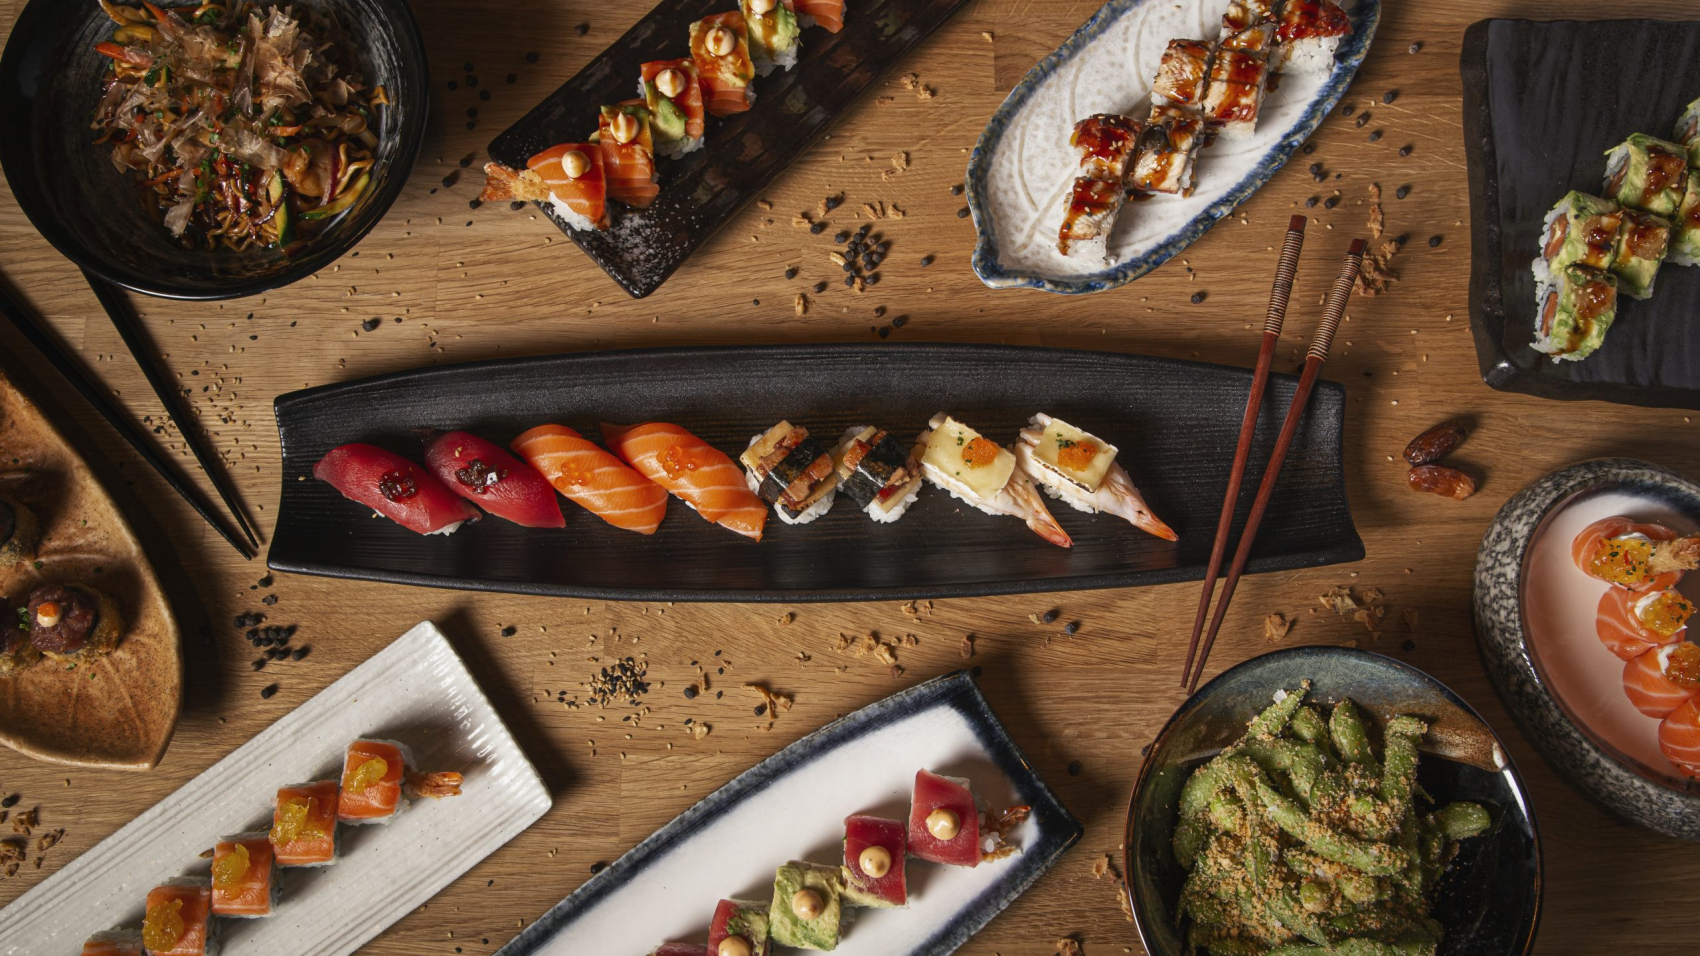 A top view of a variety of sushi, nigiri, sashimi, yakisoba and edamame on a restaurant wooden table